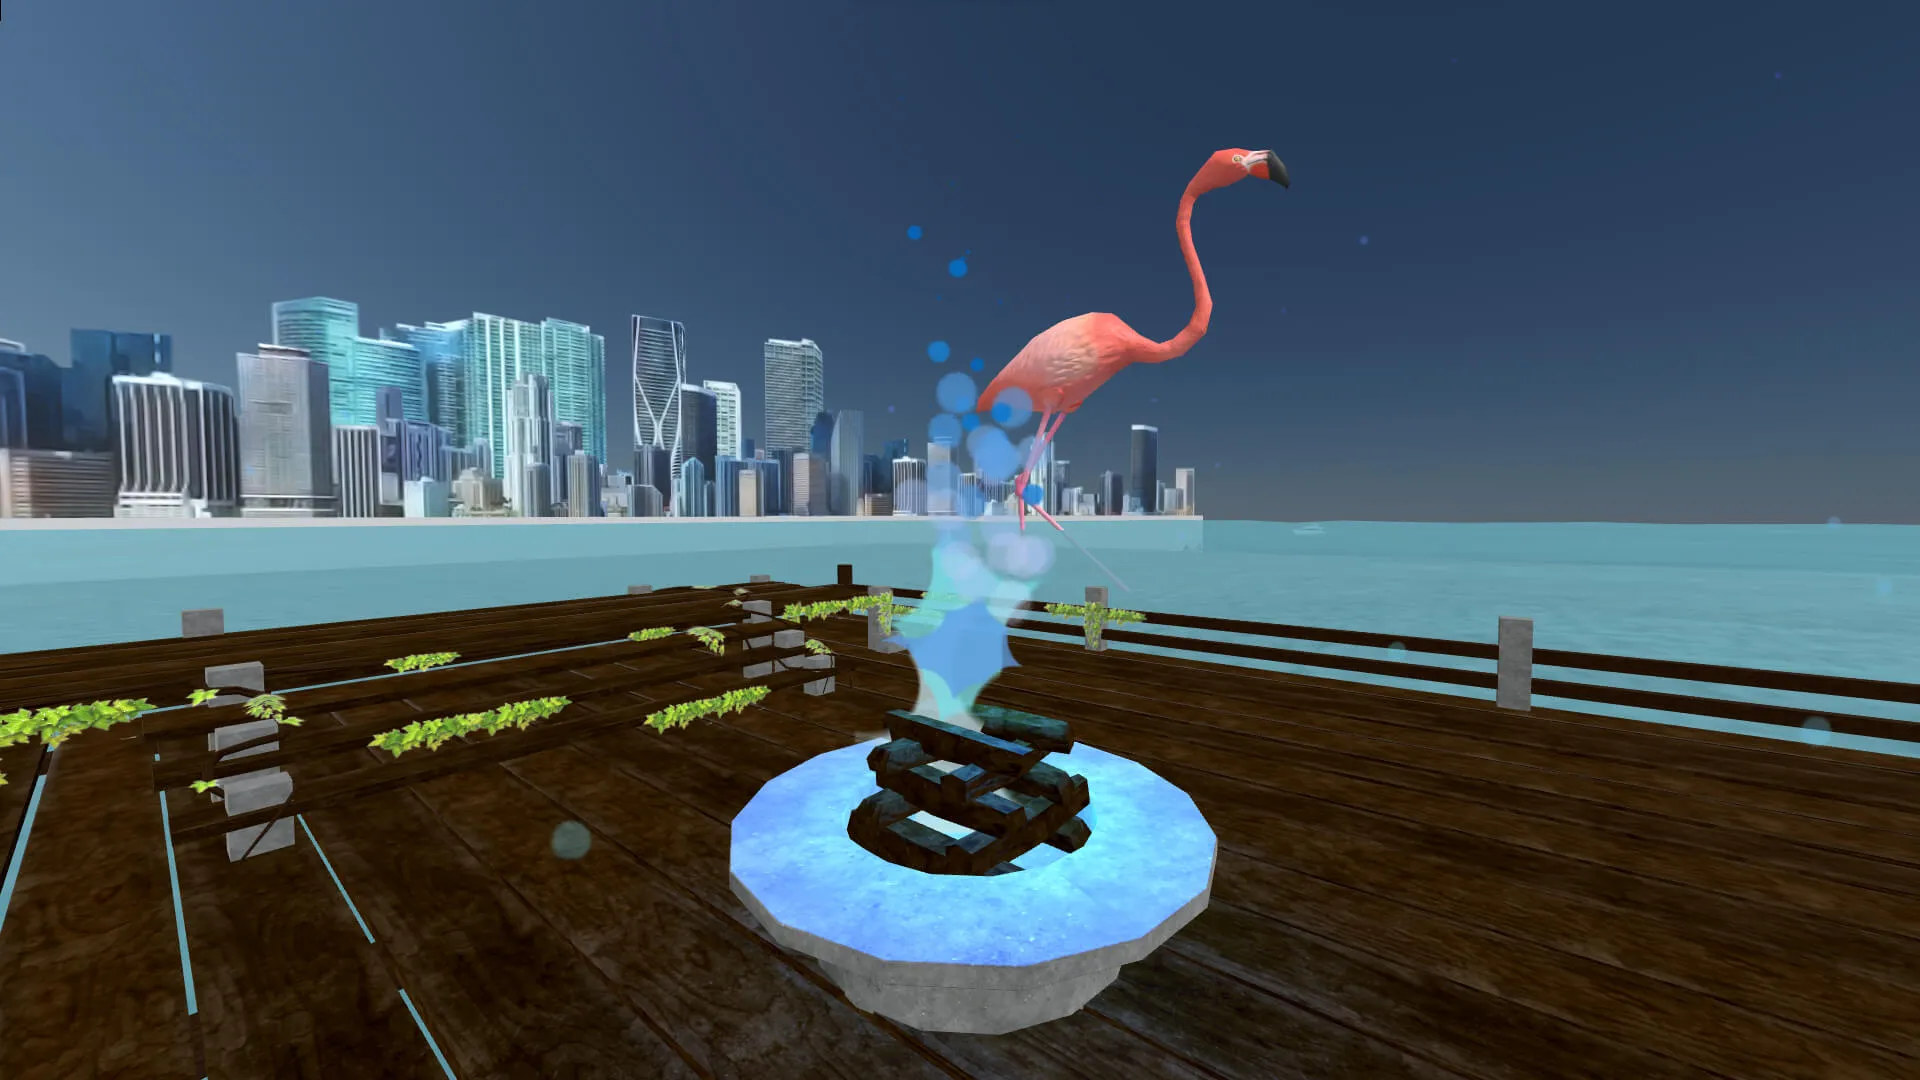 A still image of a scene in the metaverse. It shows a giant pink flamingo inside a Miami beach, and a view of some skyscrapers from a boat on the same beach